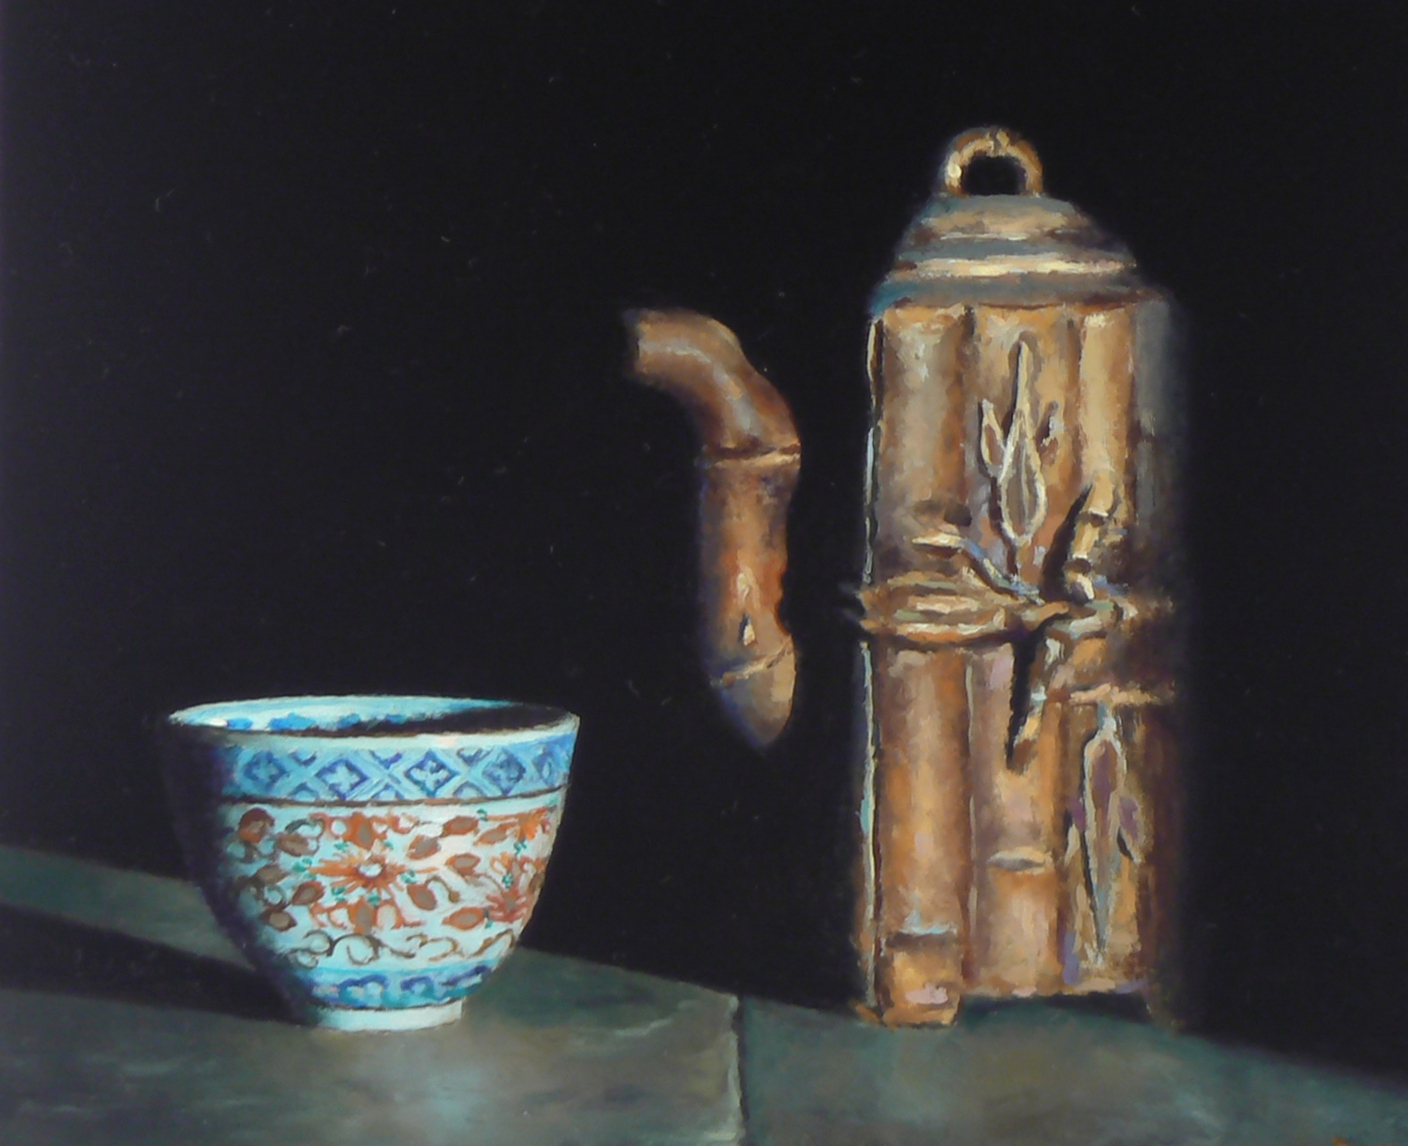 "Teacup and Teapot", oil on panel, 5x6 inches, 2008 (sold)